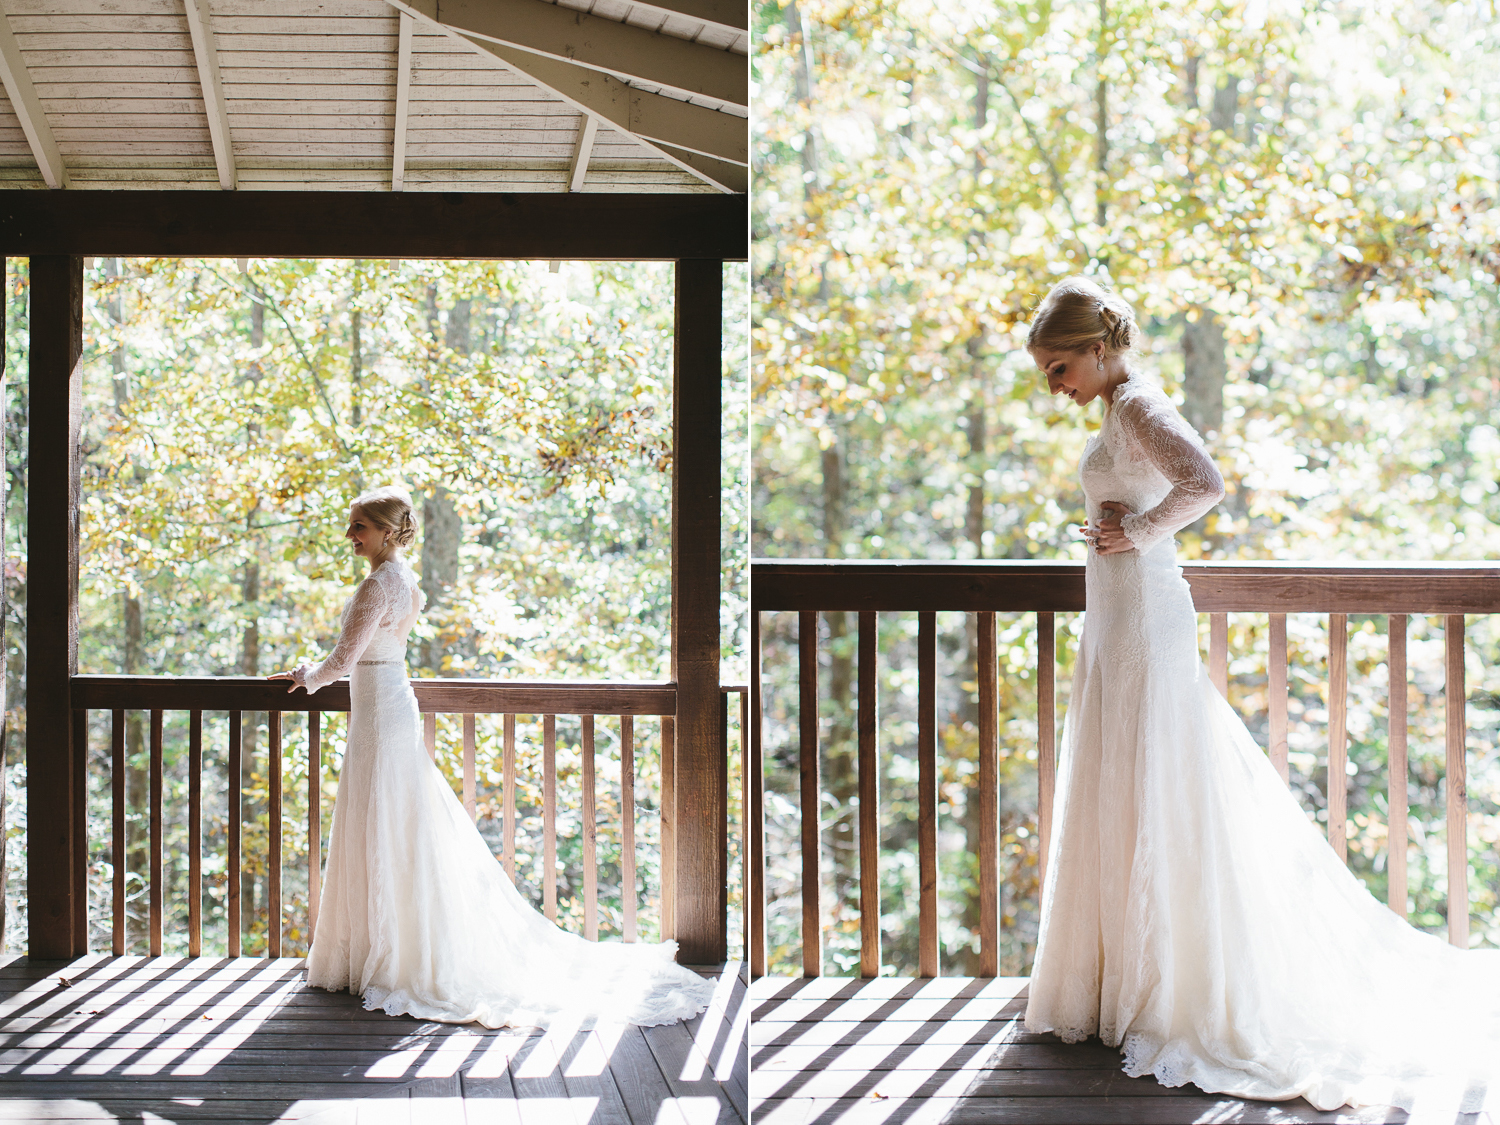 Beautiful southern bride in lace